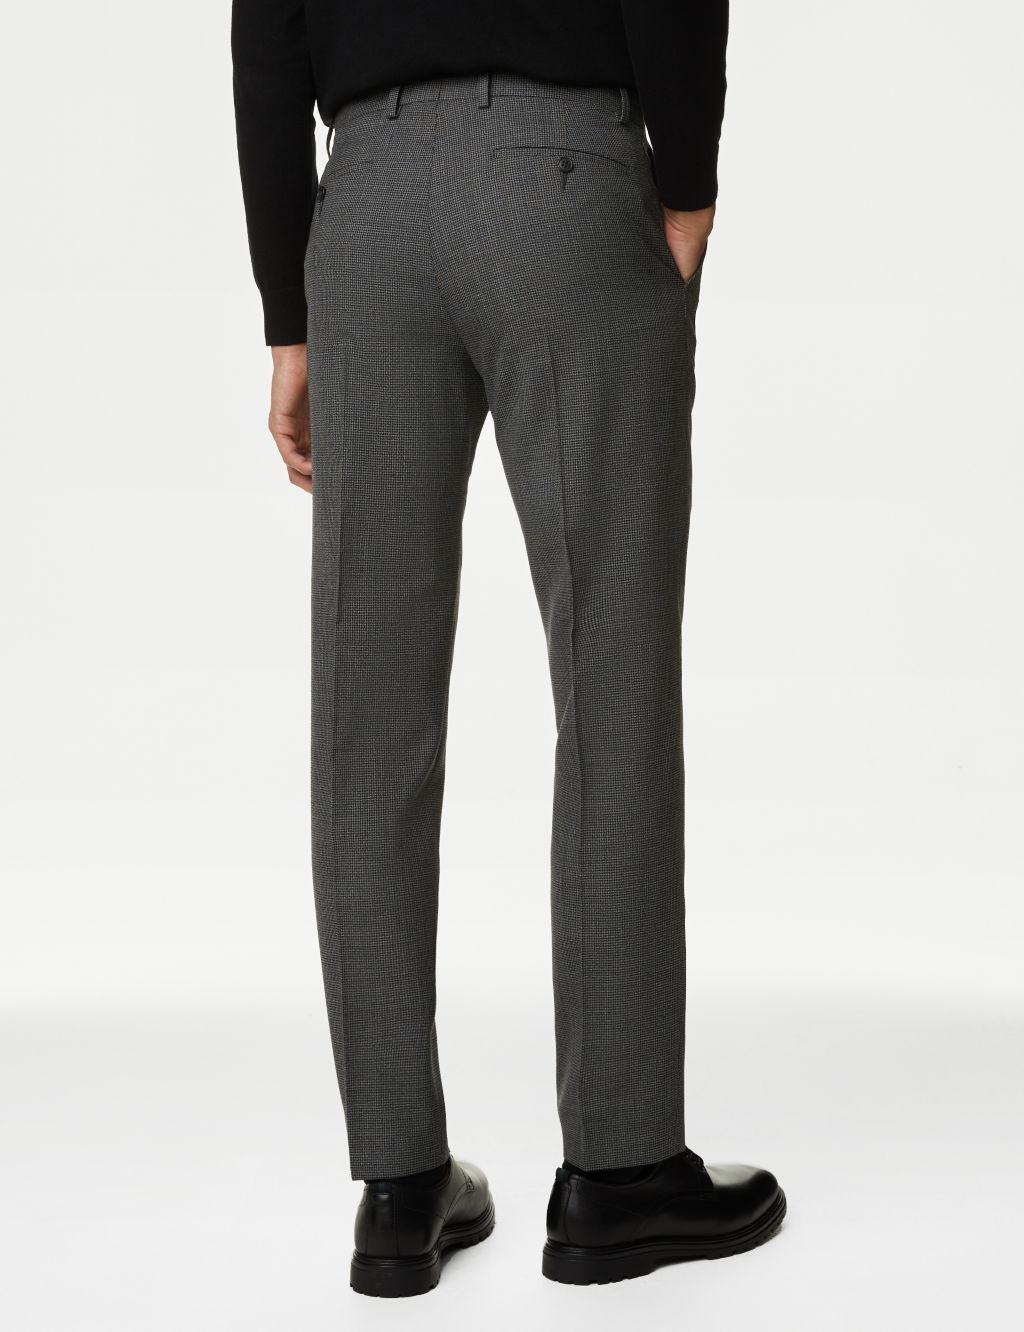 Tailored Fit Wool Blend Suit image 5